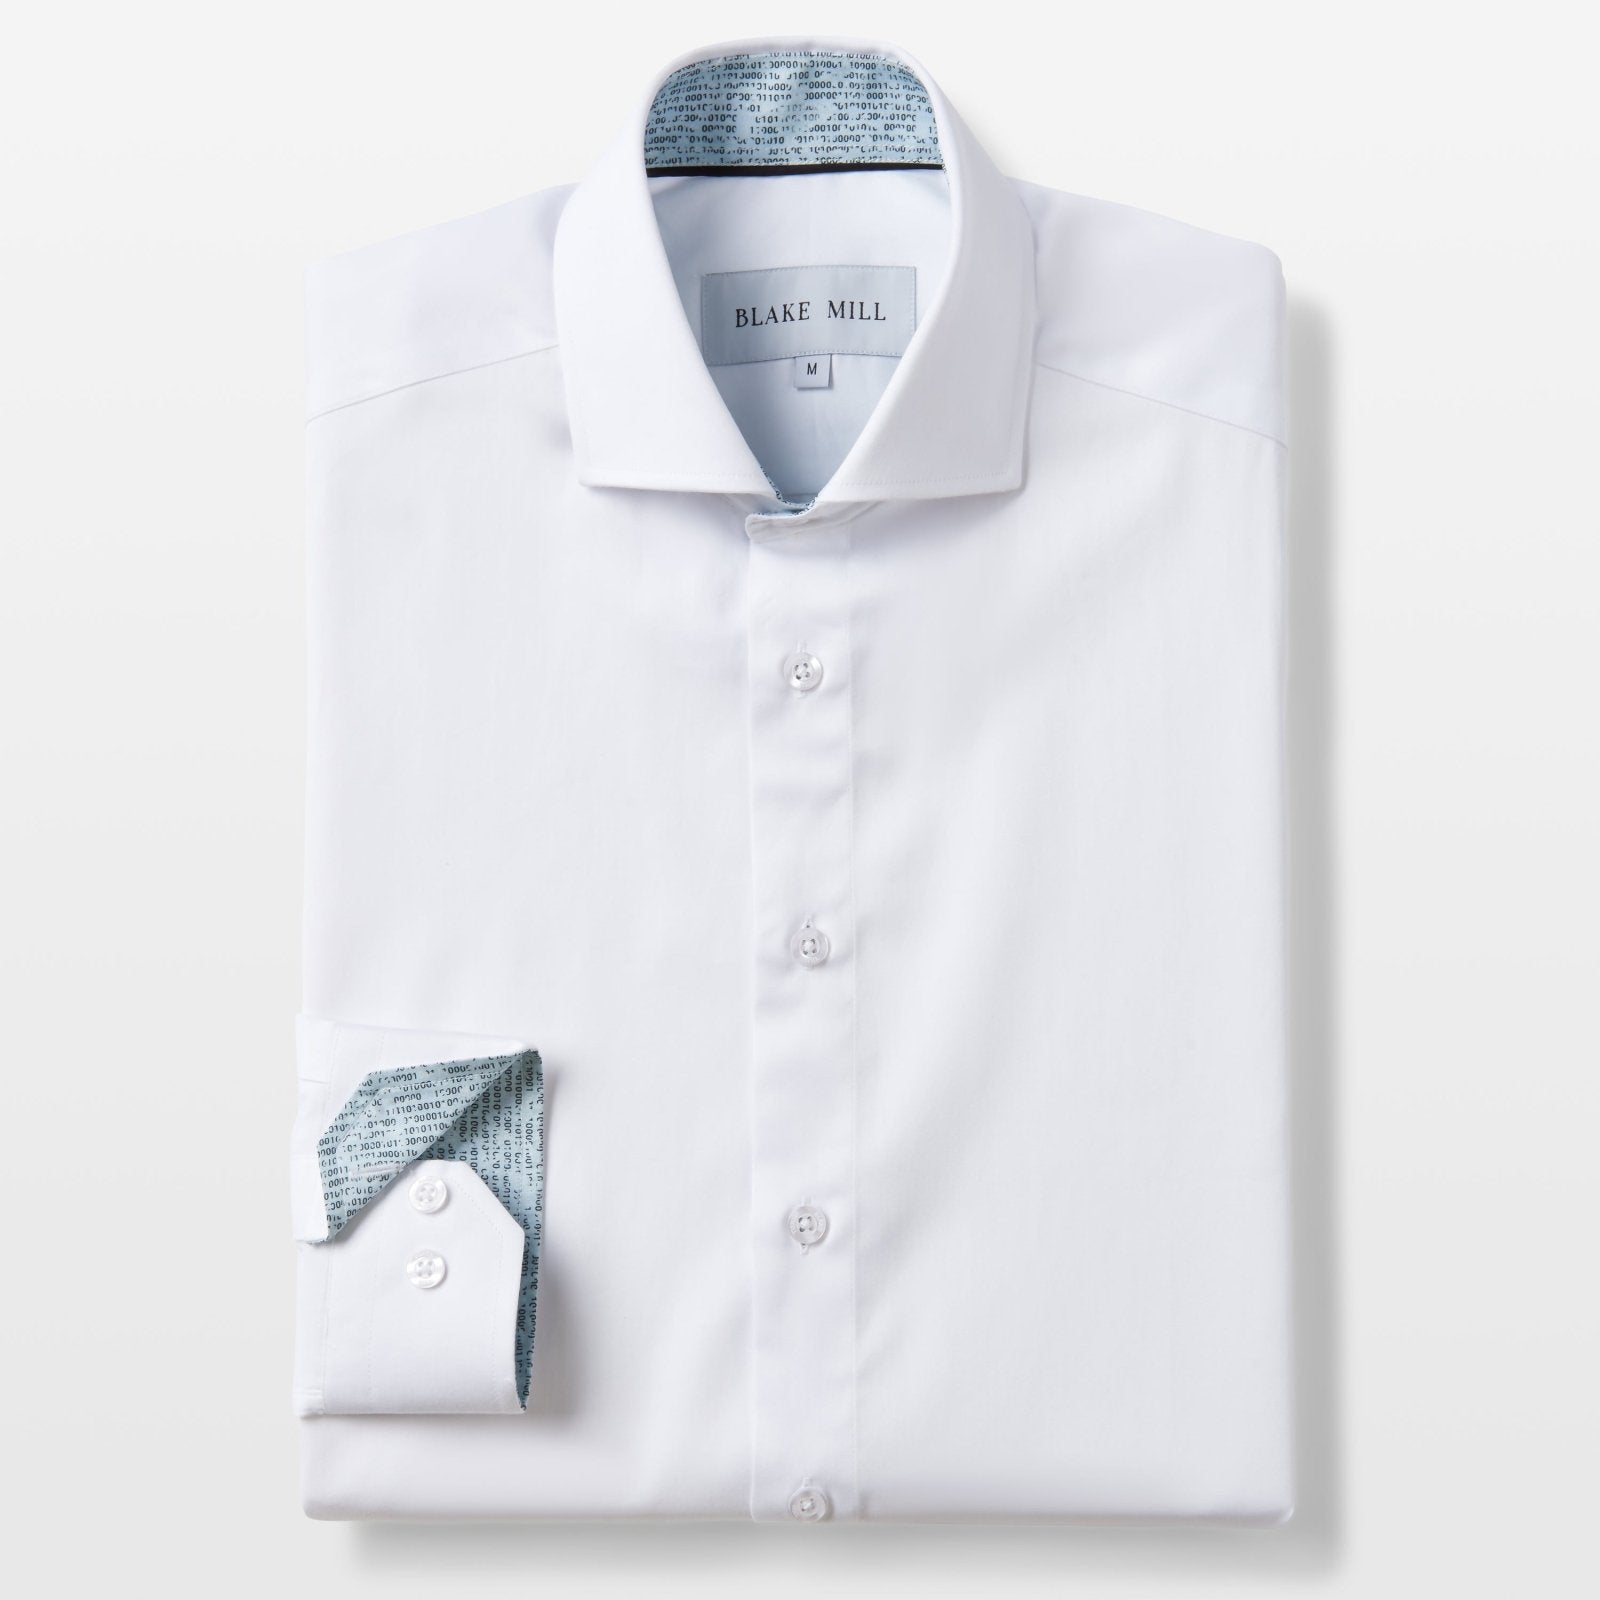 White with Teal Burn Baby Burn Accents Shirt - Blake Mill